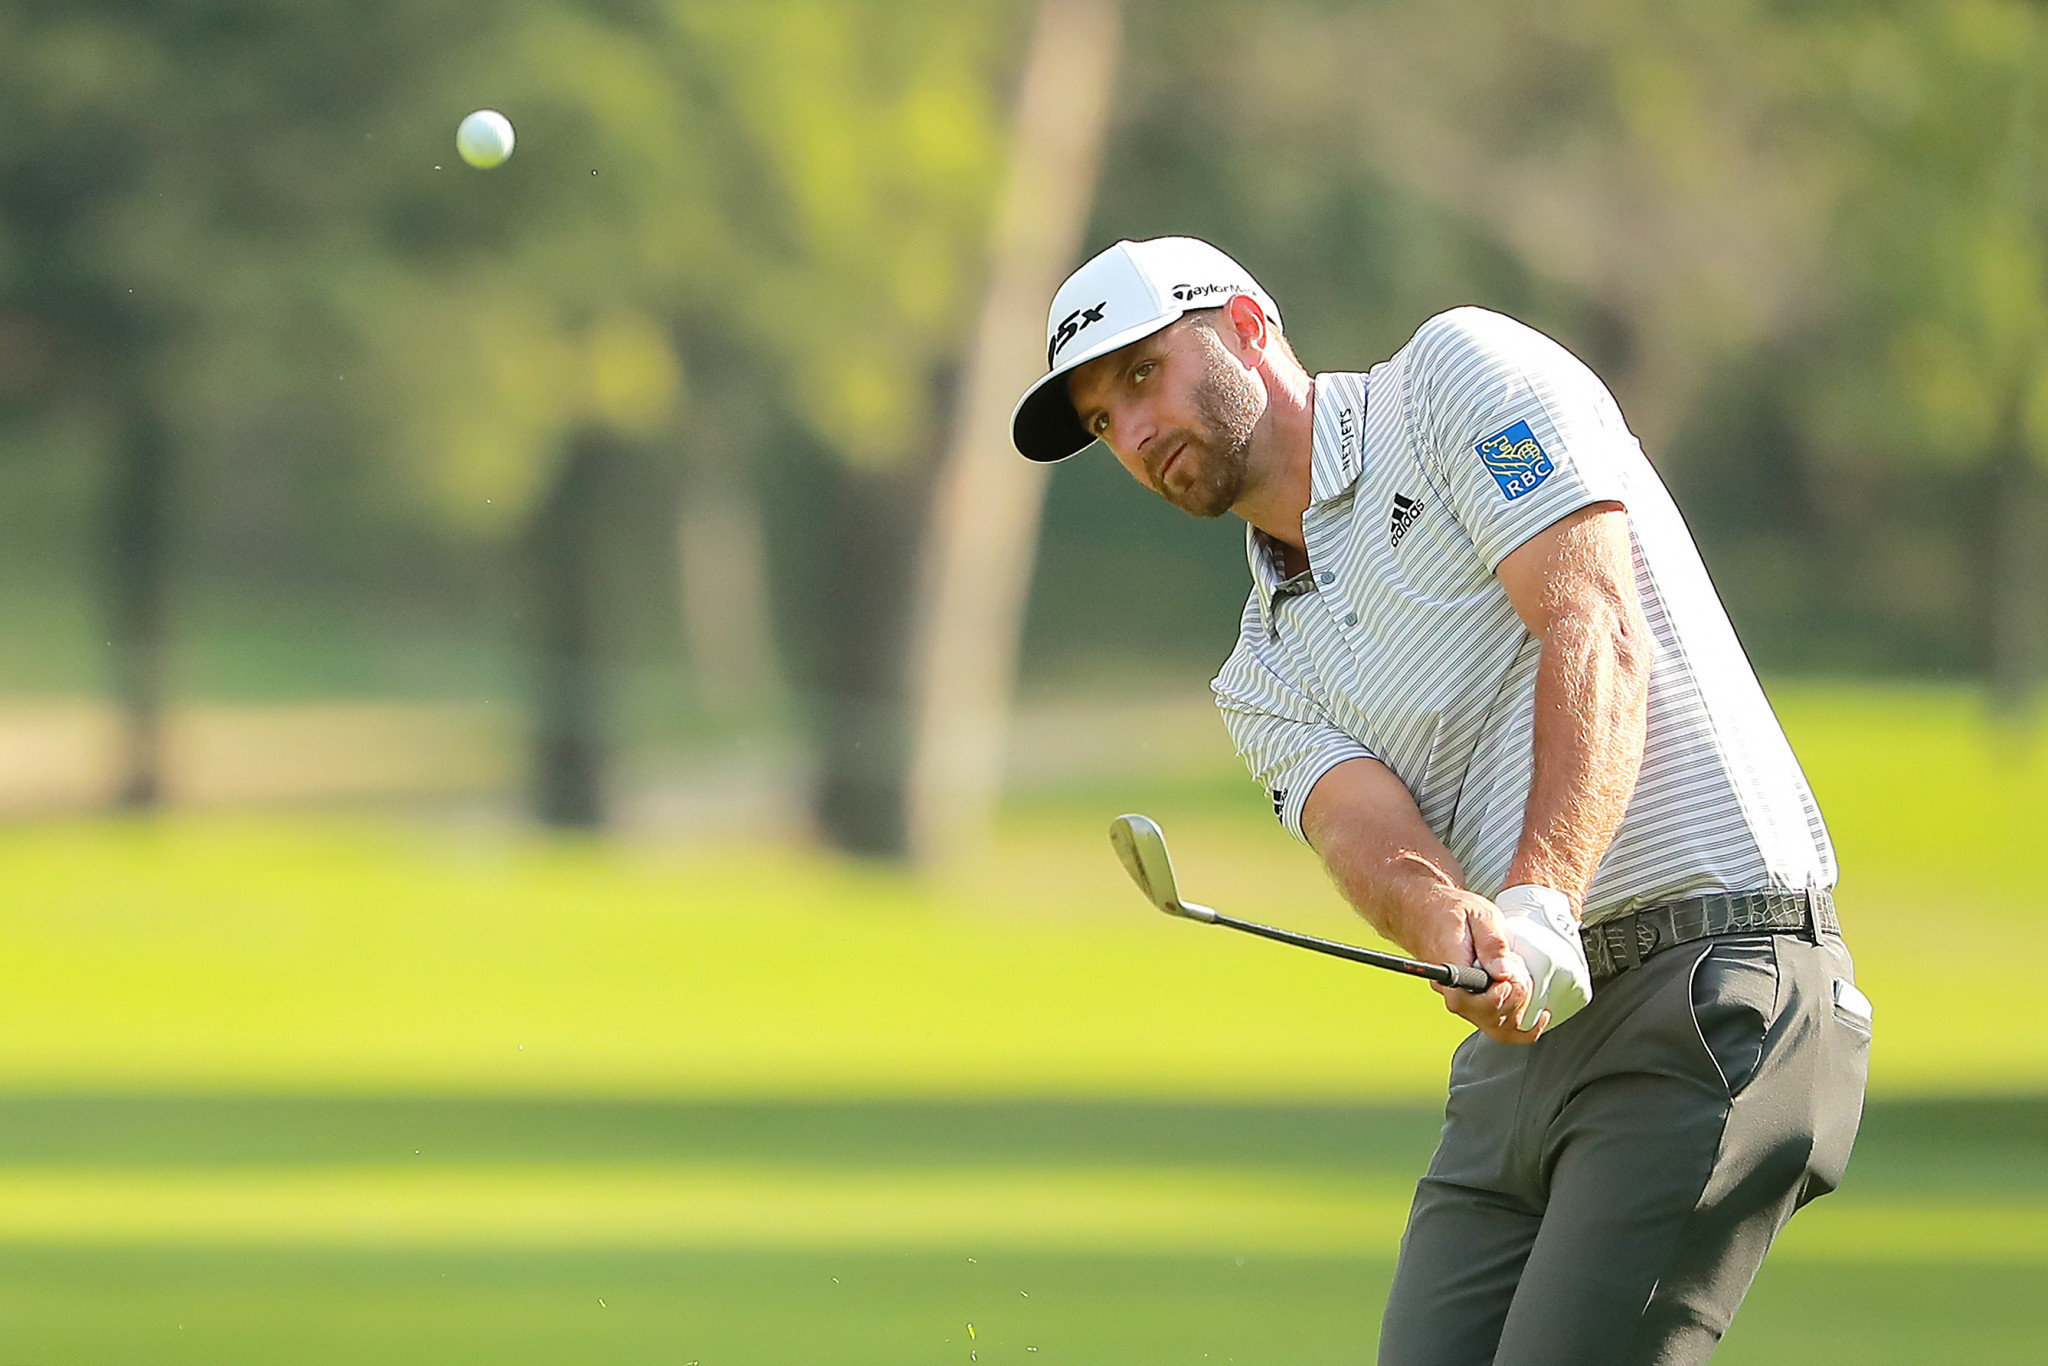 Dustin Johnson of the United States leads the WGC-Mexico Championship by four strokes ©Getty Images